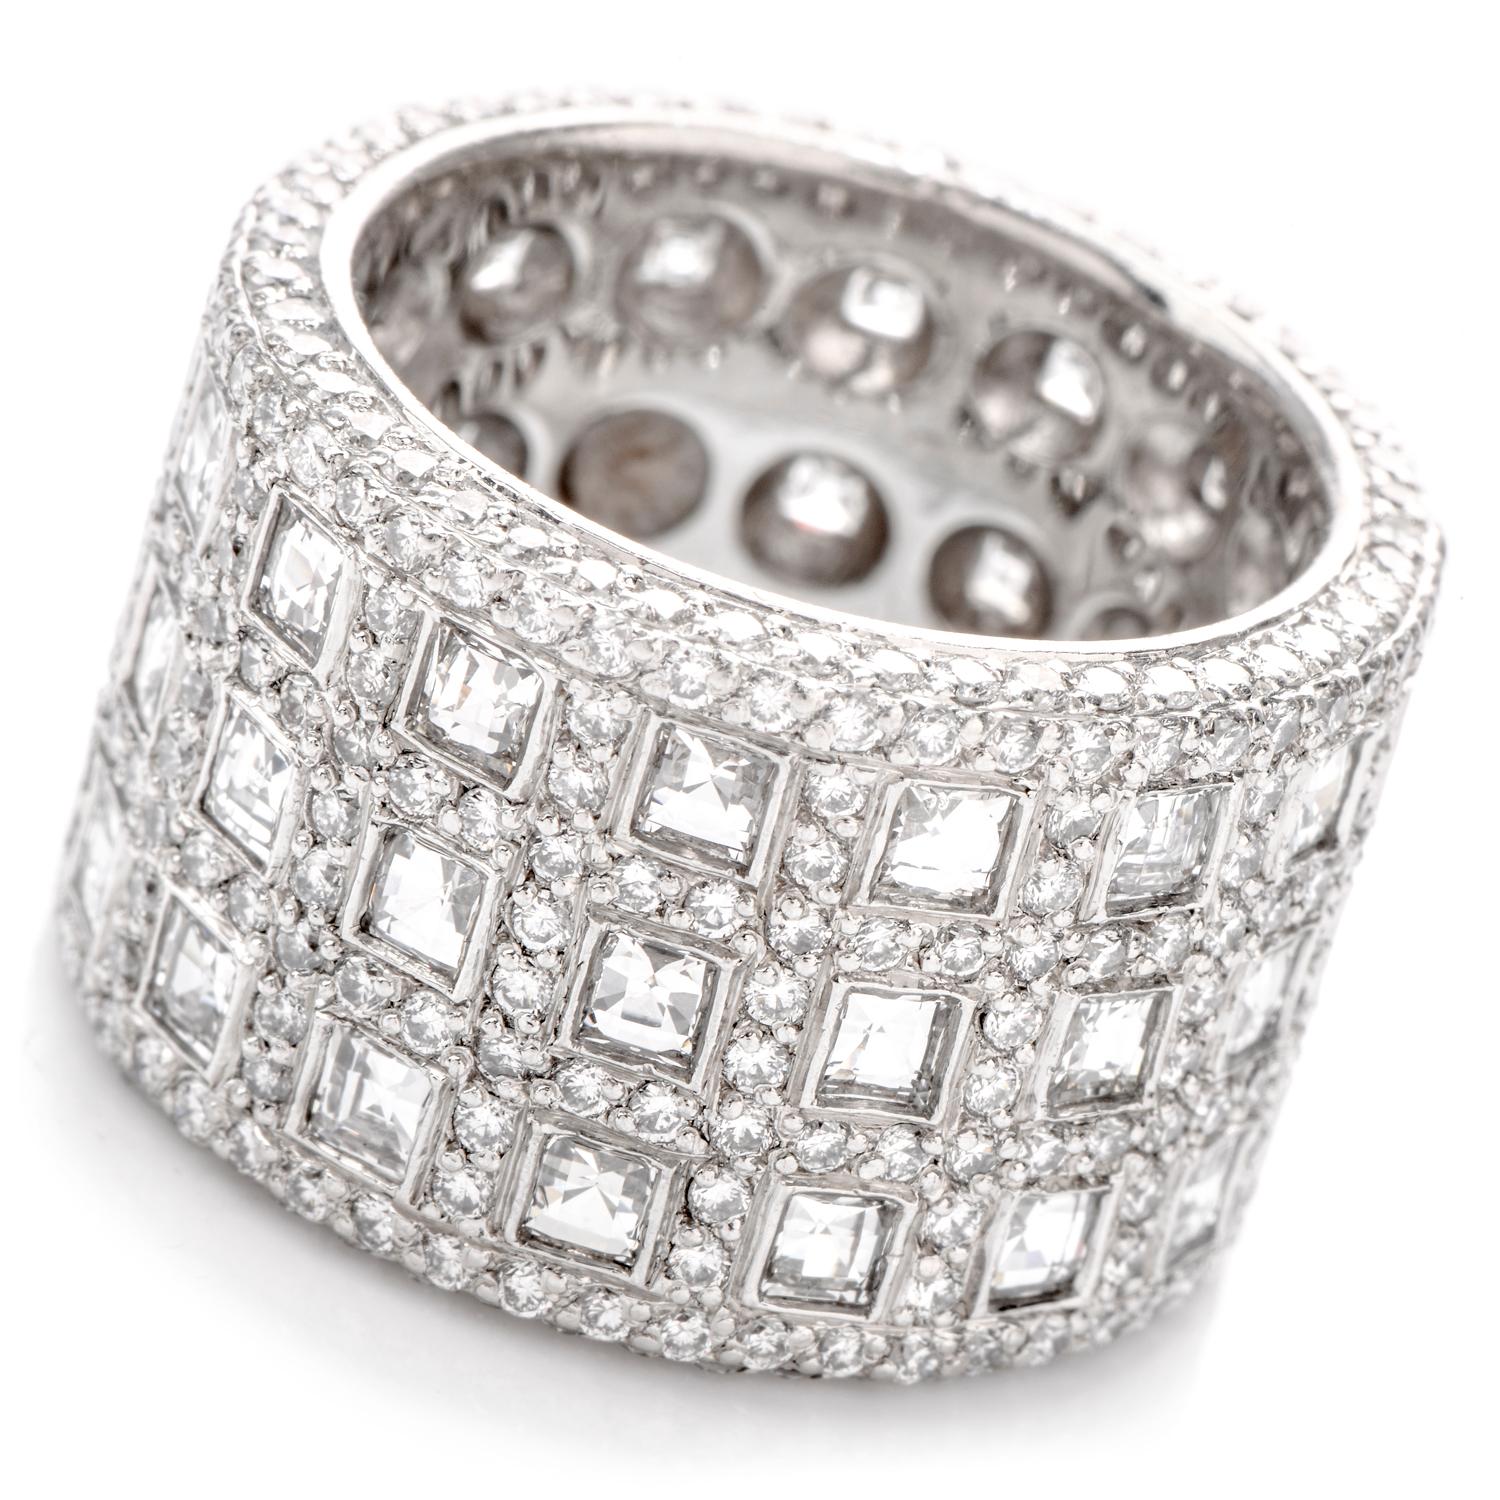 This exquisite wide Eternity Band was crafted in Luxurious Platinum.

48 Asscher cut Diamonds are bezel set amidst a sea of 

prong set round brilliant cut diamonds completely encircling this

extraordinary design.  

Diamonds weigh approx. 10.45